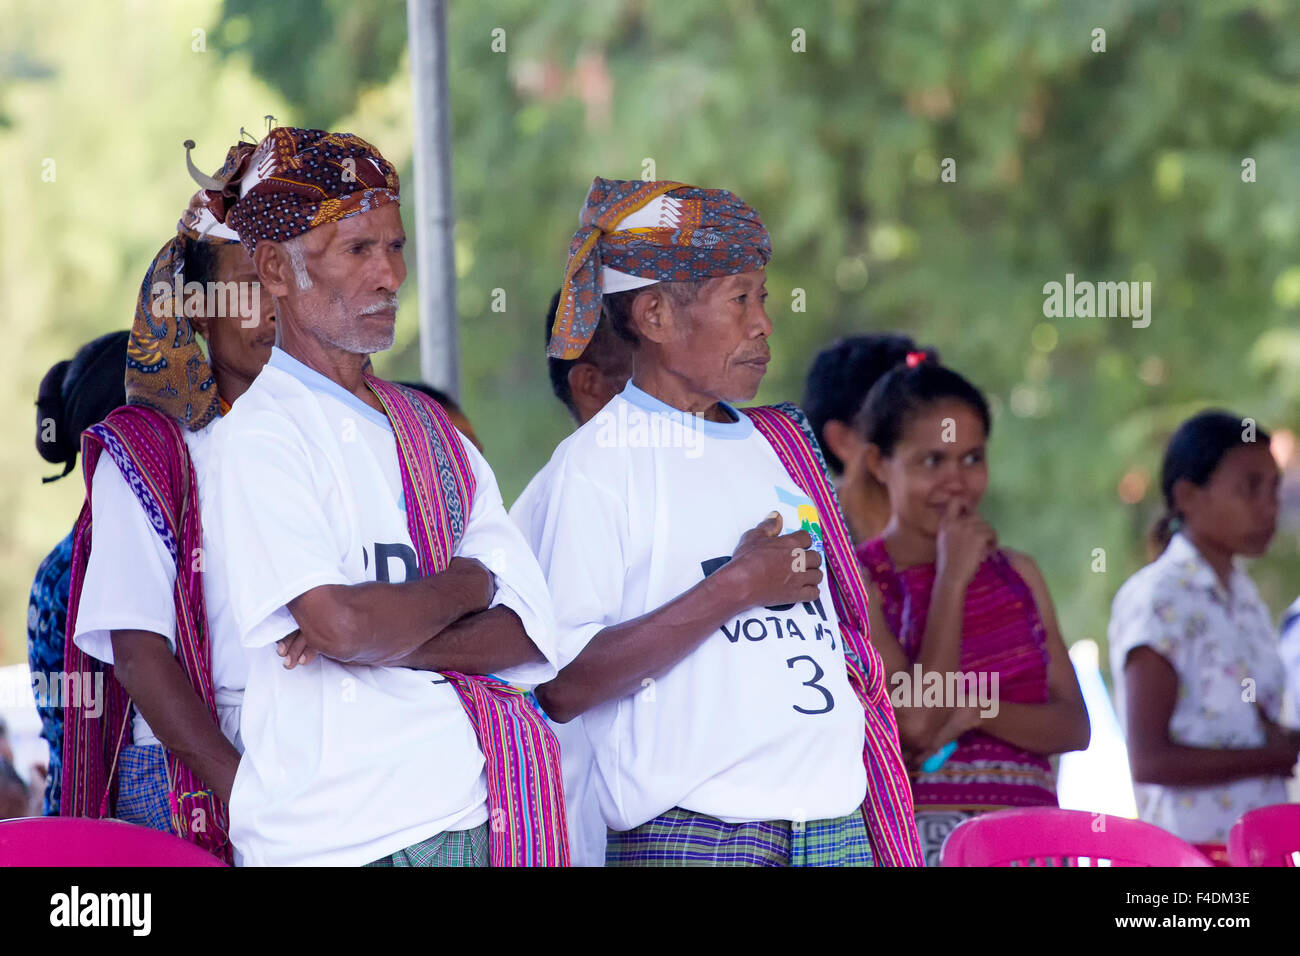 Liquica, East Timor  - June 25, 2012: Traditional leaders in East Timor attending a political campaign event in 2012 elections Stock Photo